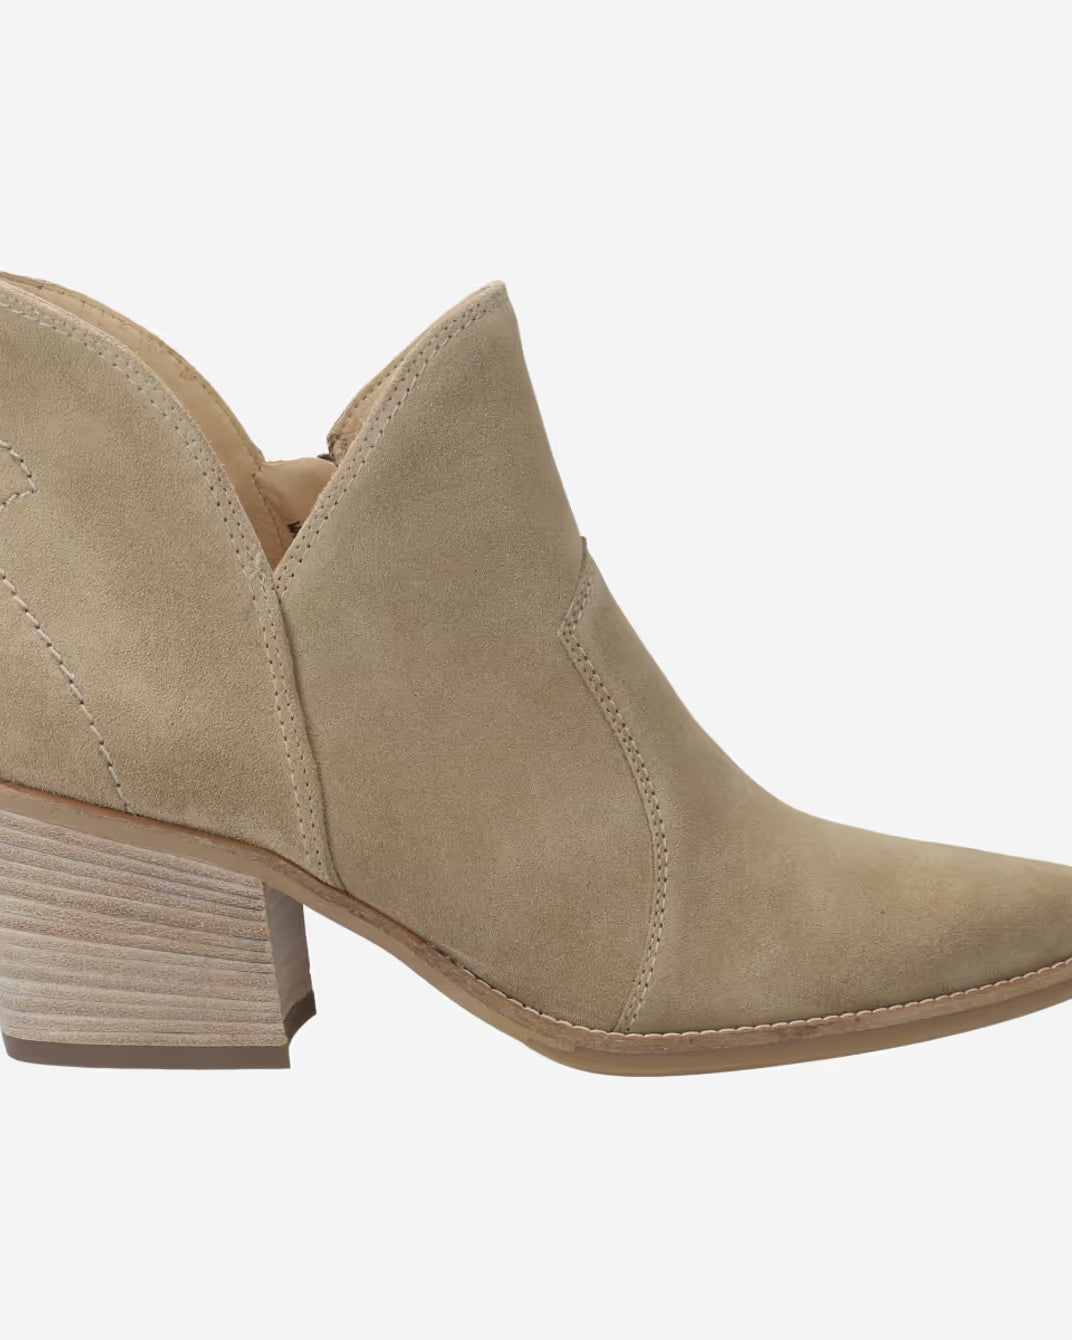 Paul Green Beige Western Style Suede Ankle Boots